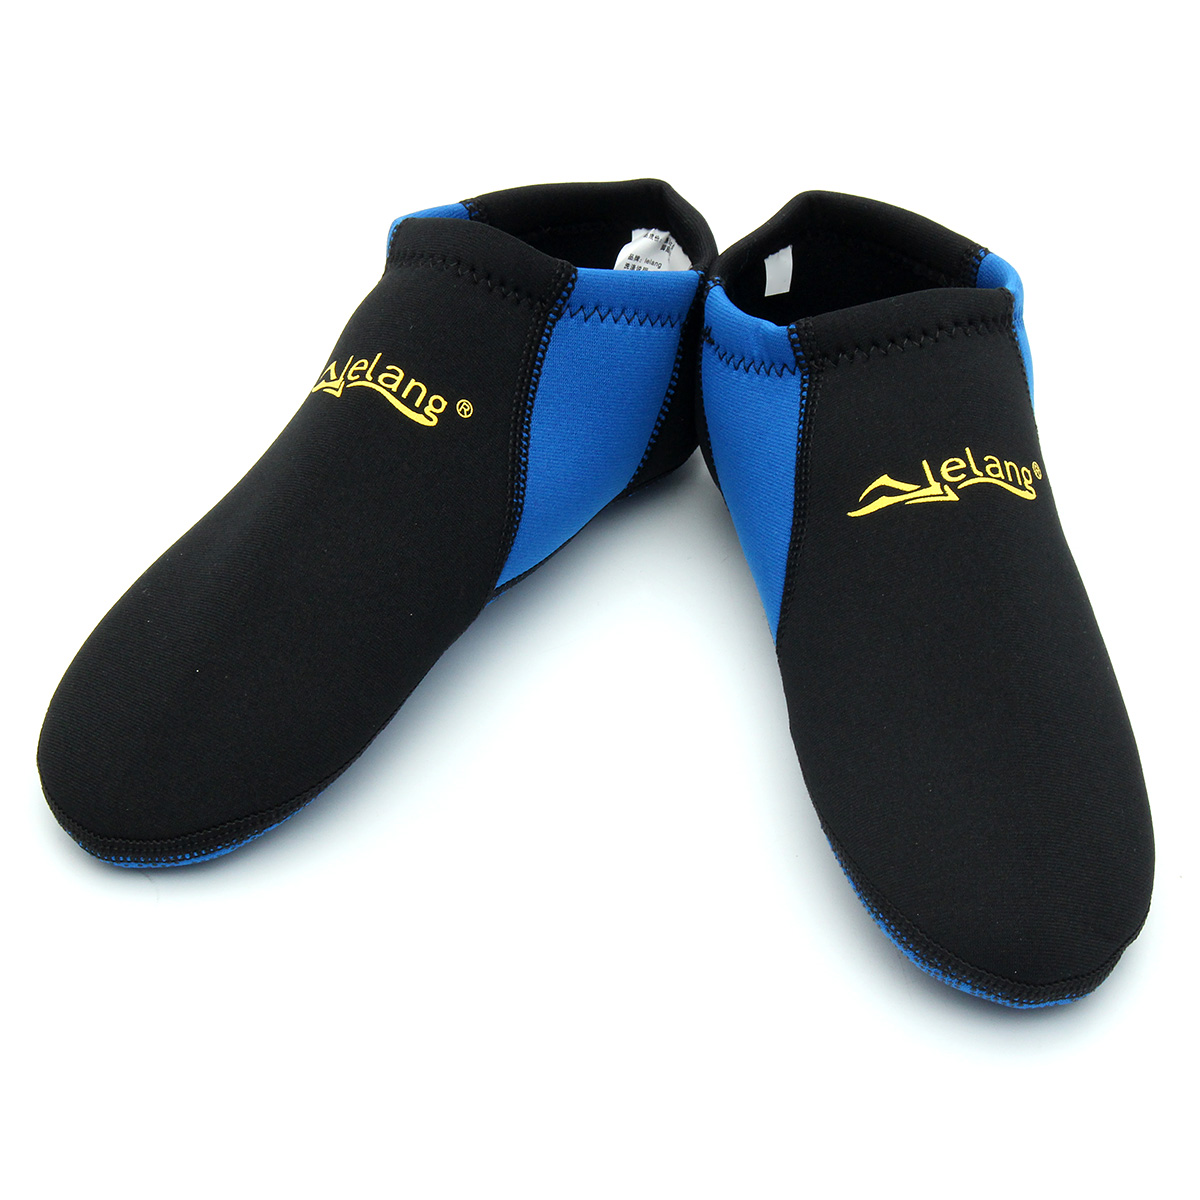 Outdoor-Swimming-Snorkel-Socks-Soft-Beach-Shoes-Water-Sport-Scuba-Surf-Diving-1130872-5